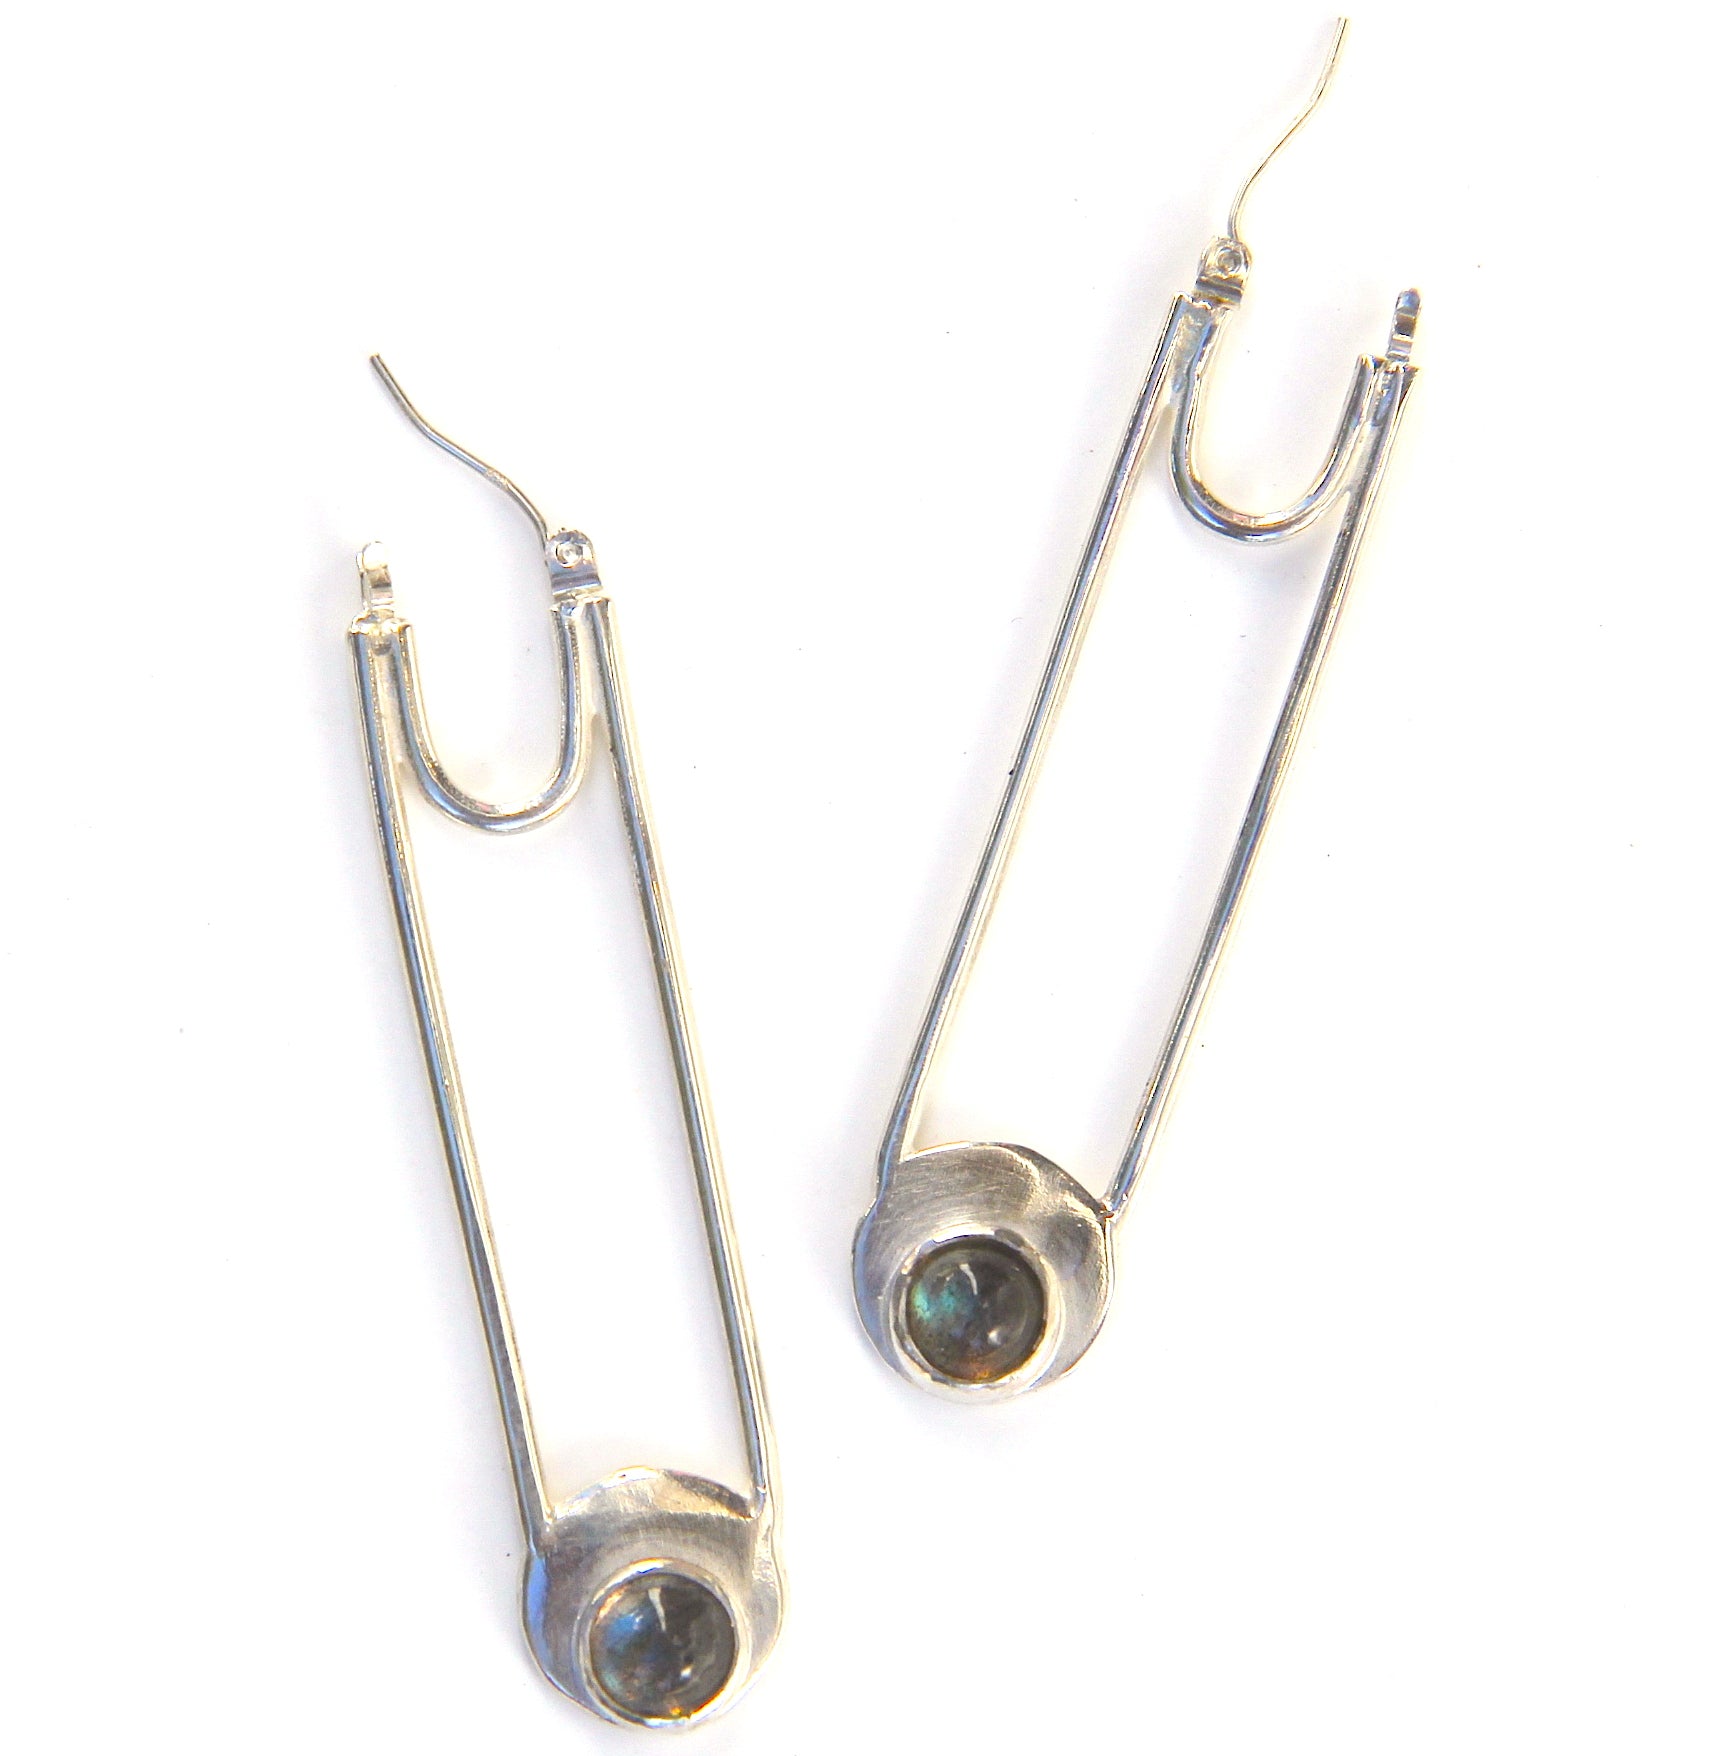 Moonage Daydream Earrings with labradorite